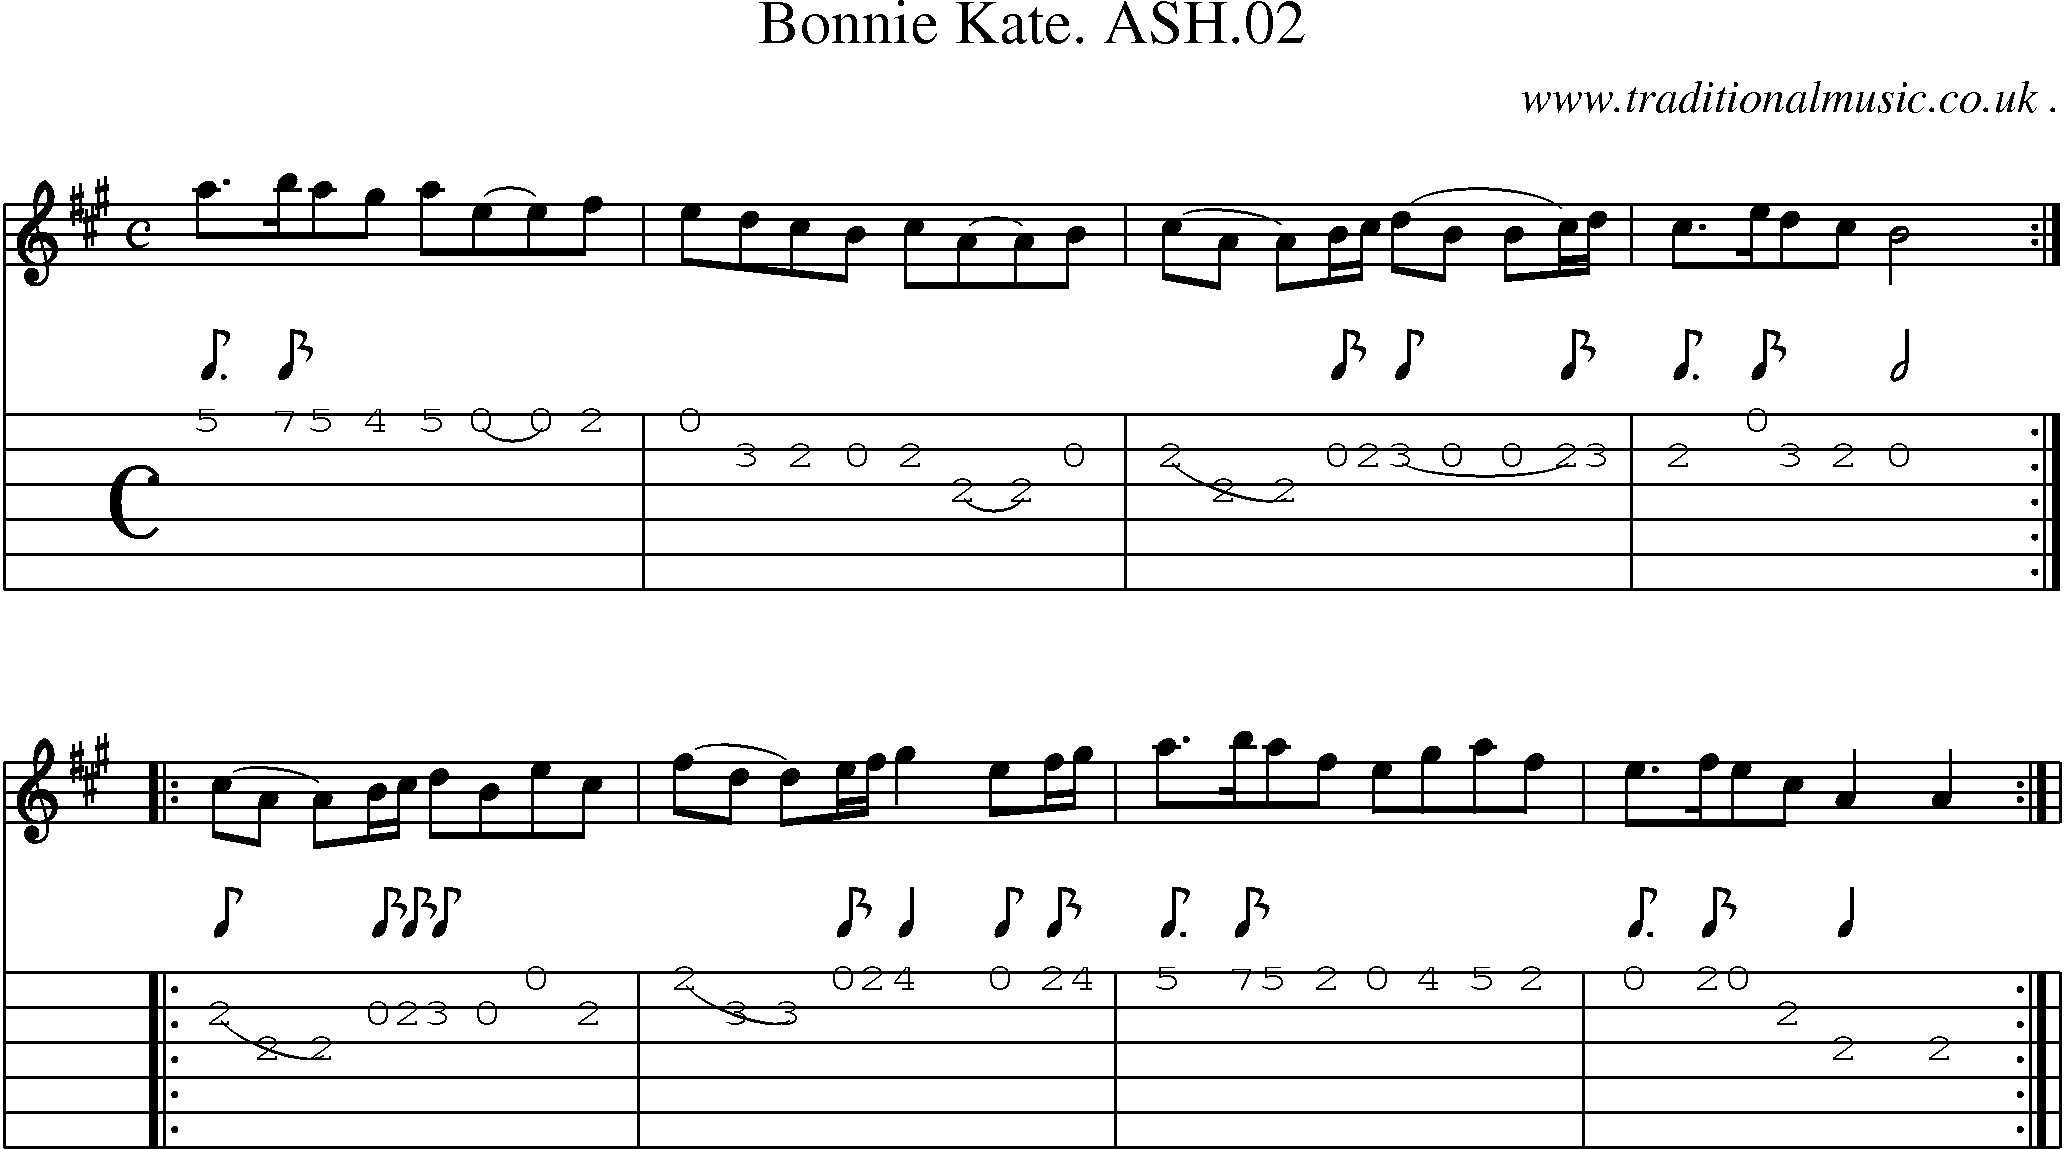 Sheet-Music and Guitar Tabs for Bonnie Kate Ash02